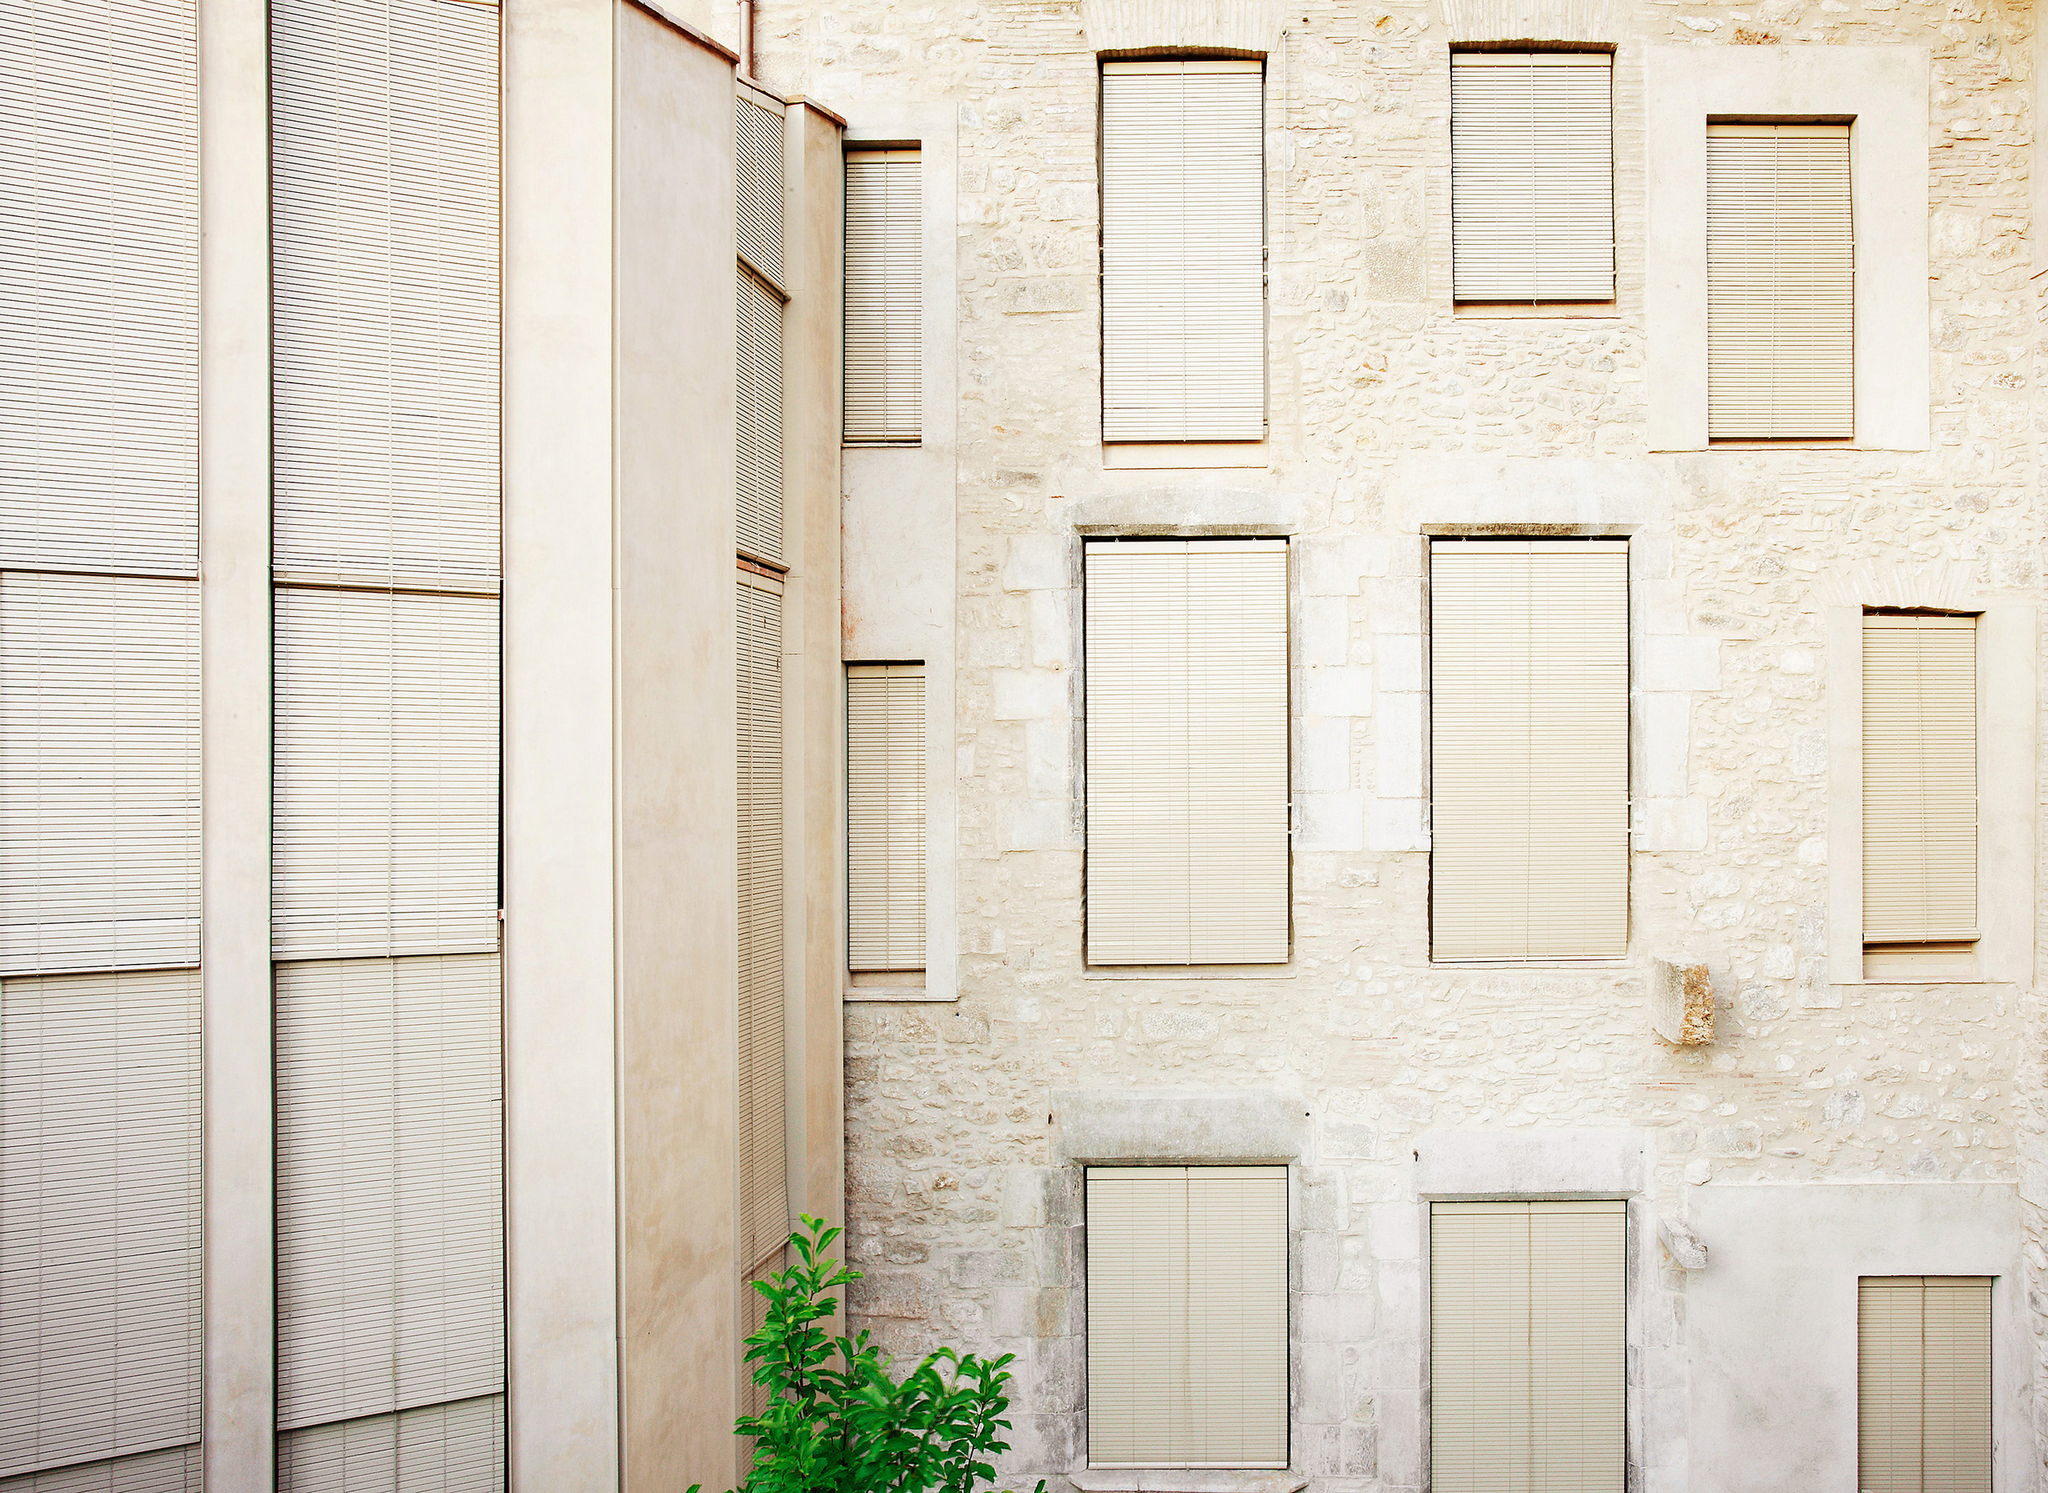 collage house - refurbishment of a residential building in Girona's old town